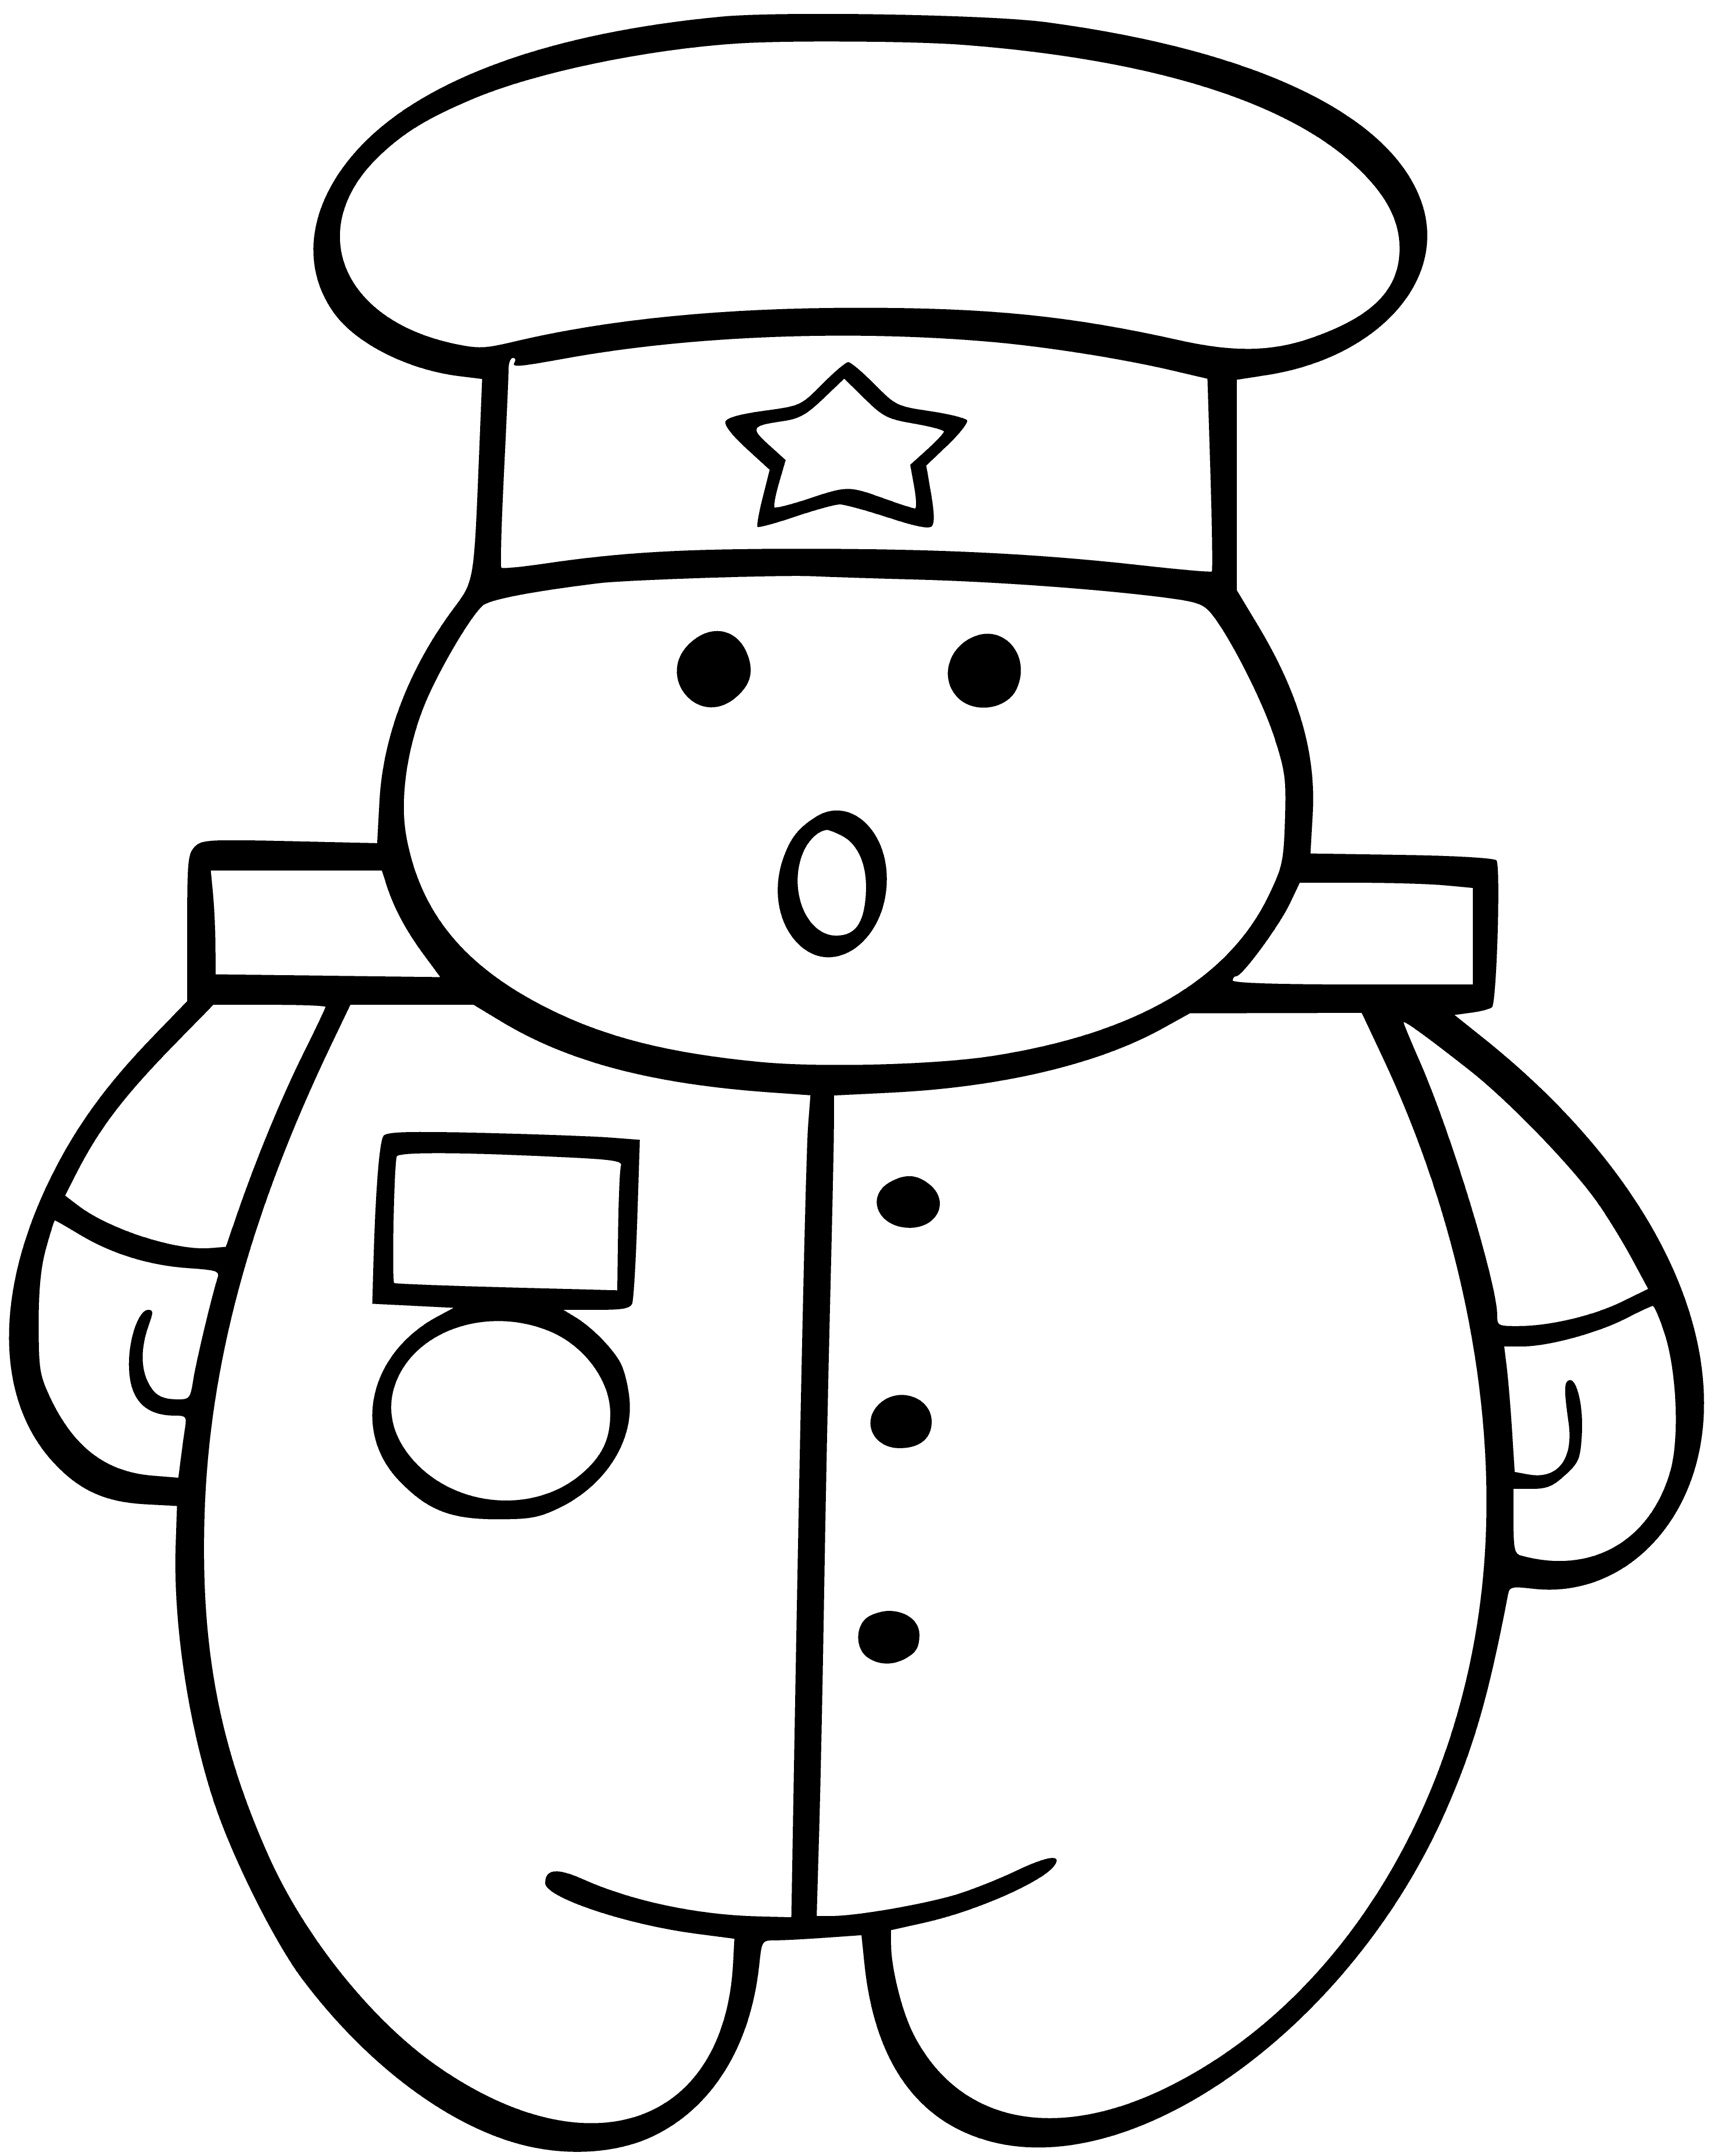 coloring page: Explore different professions in fun coloring page – doctors, lawyers, teachers, businesspeople, government, military & police.